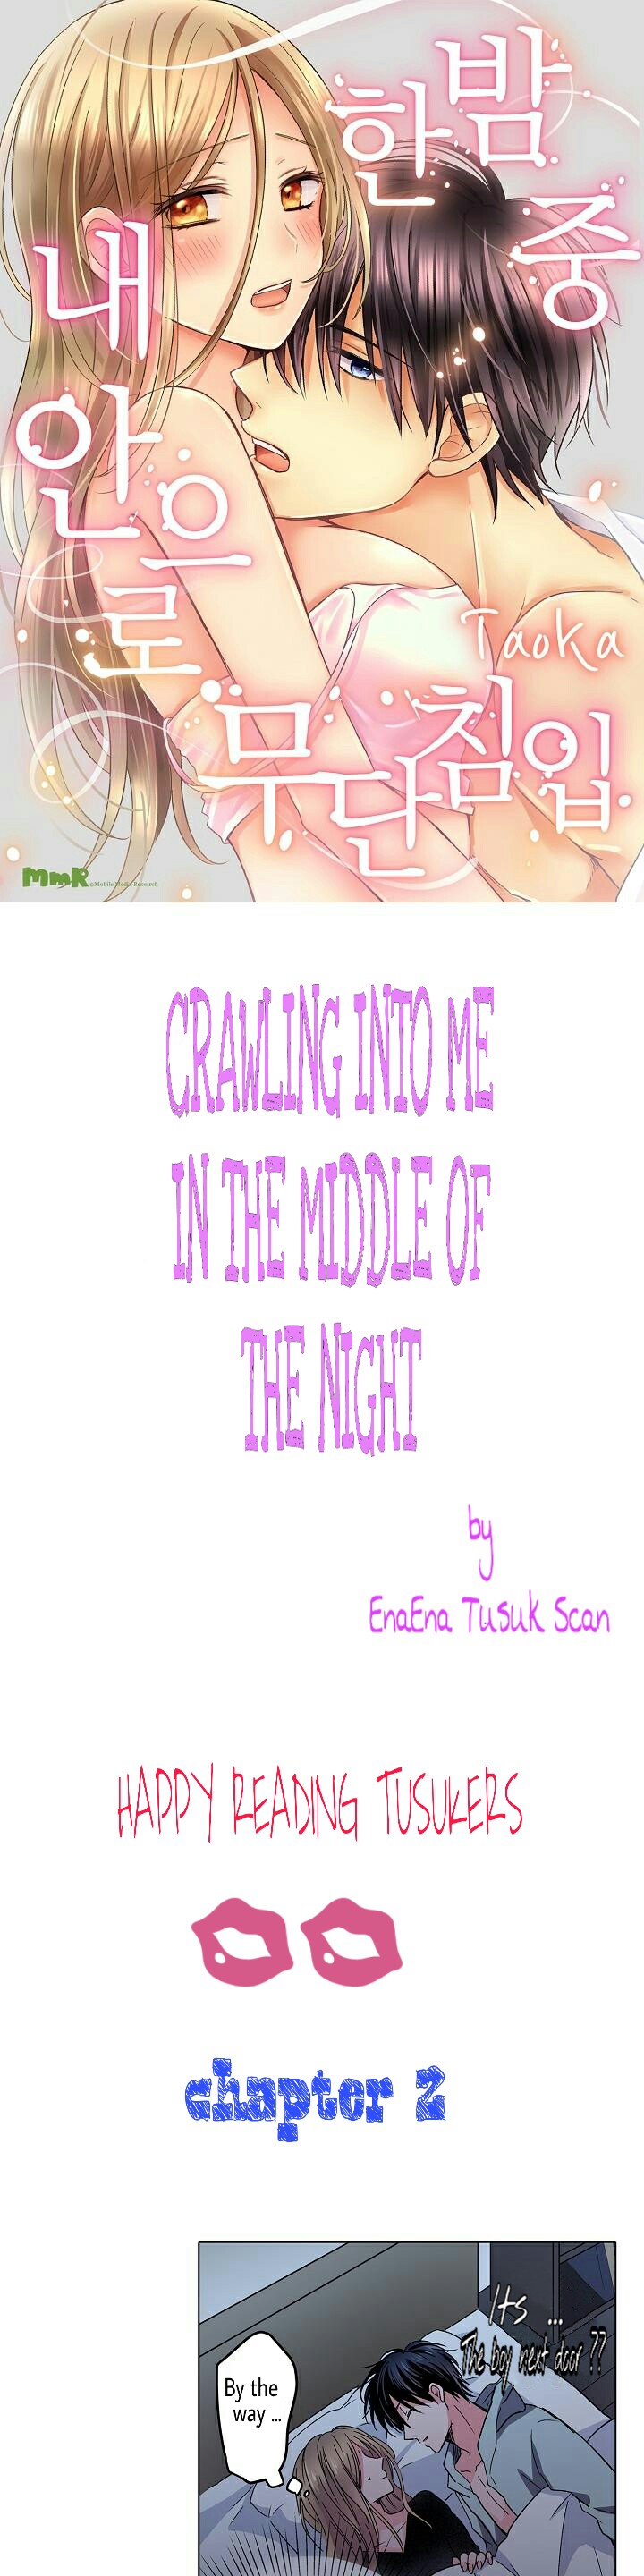 Crawling Into Me In The Middle Of The Night - Page 1